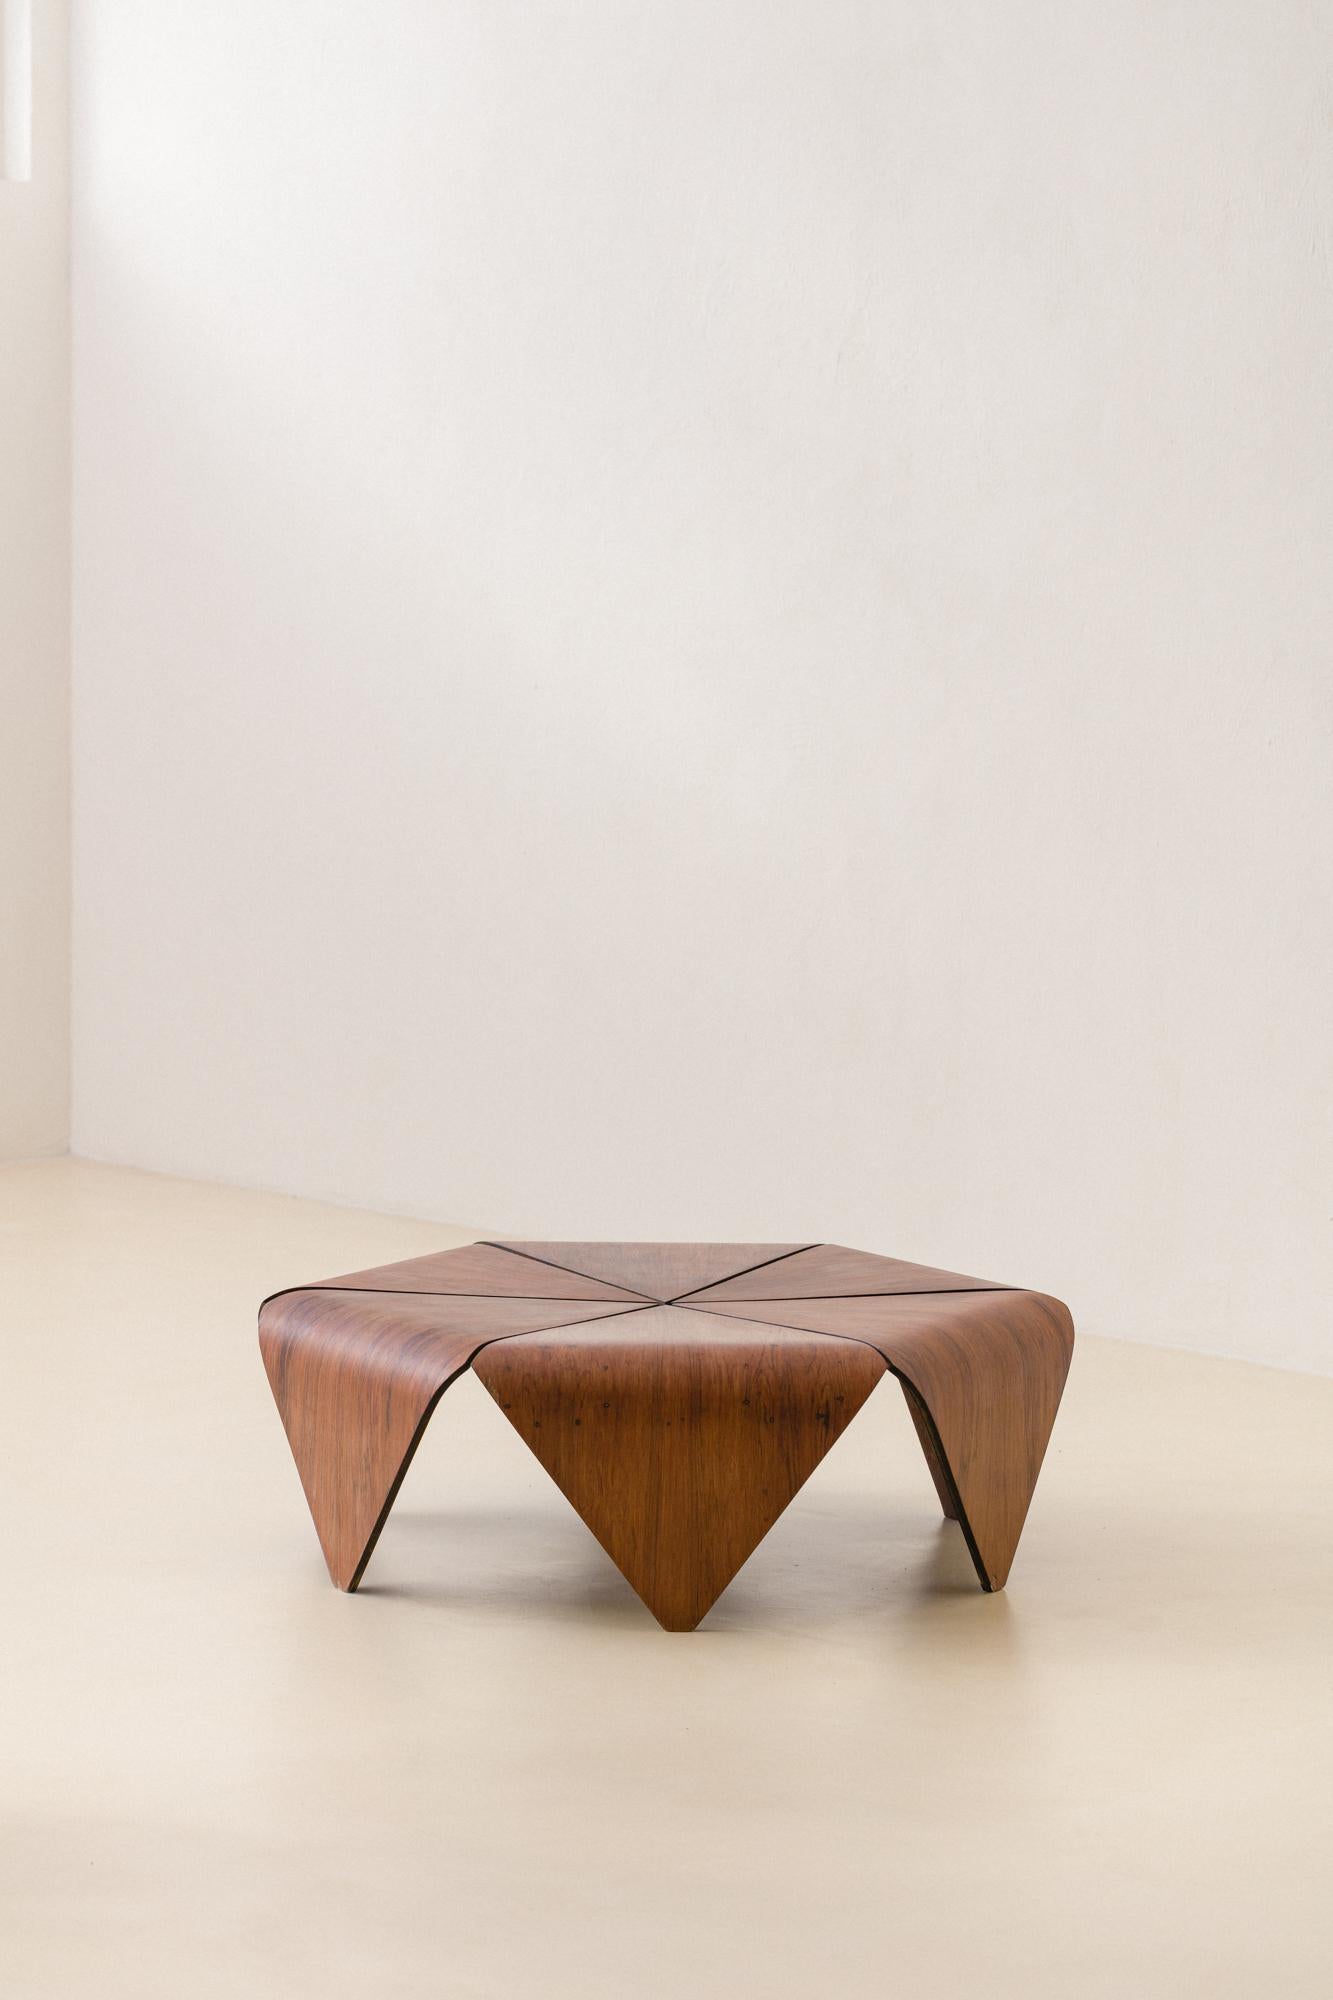 The iconic Petala is a coffee table designed by Jorge Zalszupin (1922-2020) in 1959 and produced by his company, L'atelier. The piece is made of molded laminate wood with a petal shape.

Much more than rationalizing design, Zalszupin focused